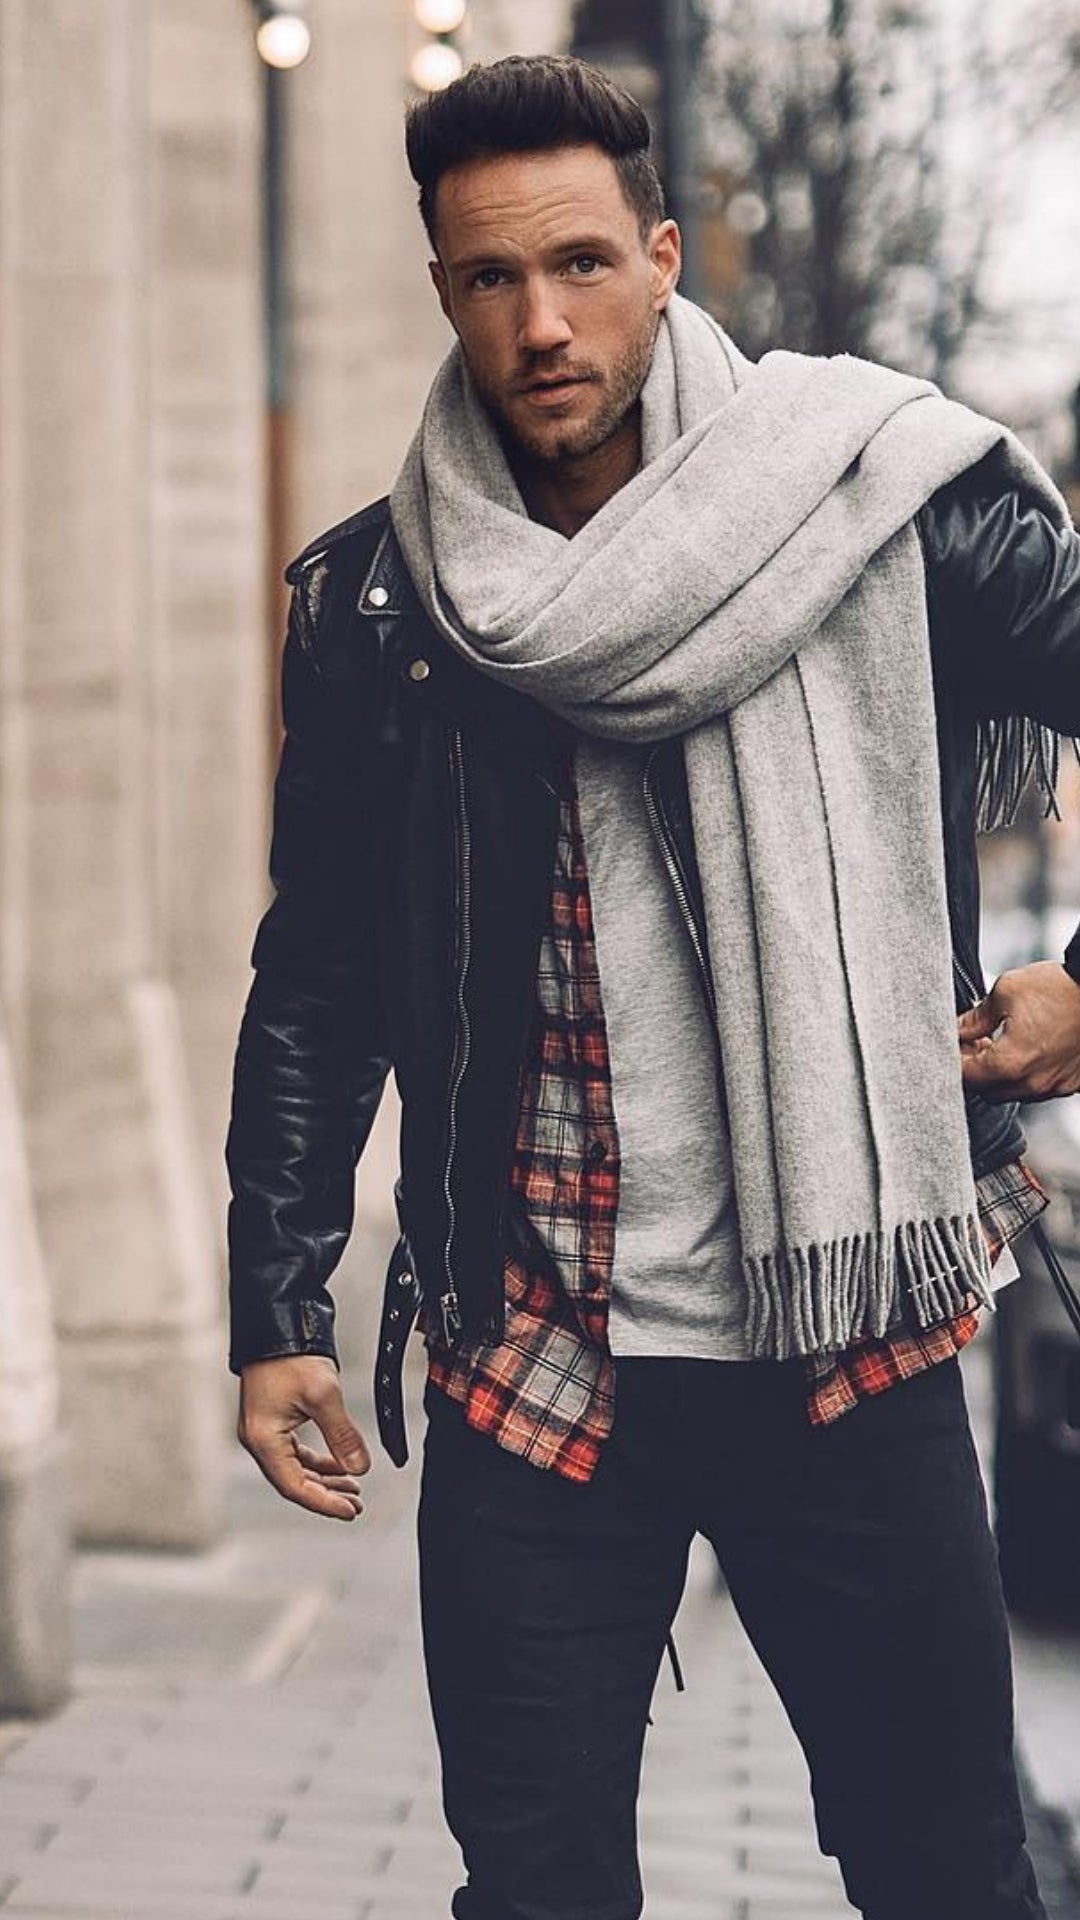 You'll Fall In Love With These Winter Outfits #winterfashion #fallfashion #mensfashion #streetstyle #magic_fox 